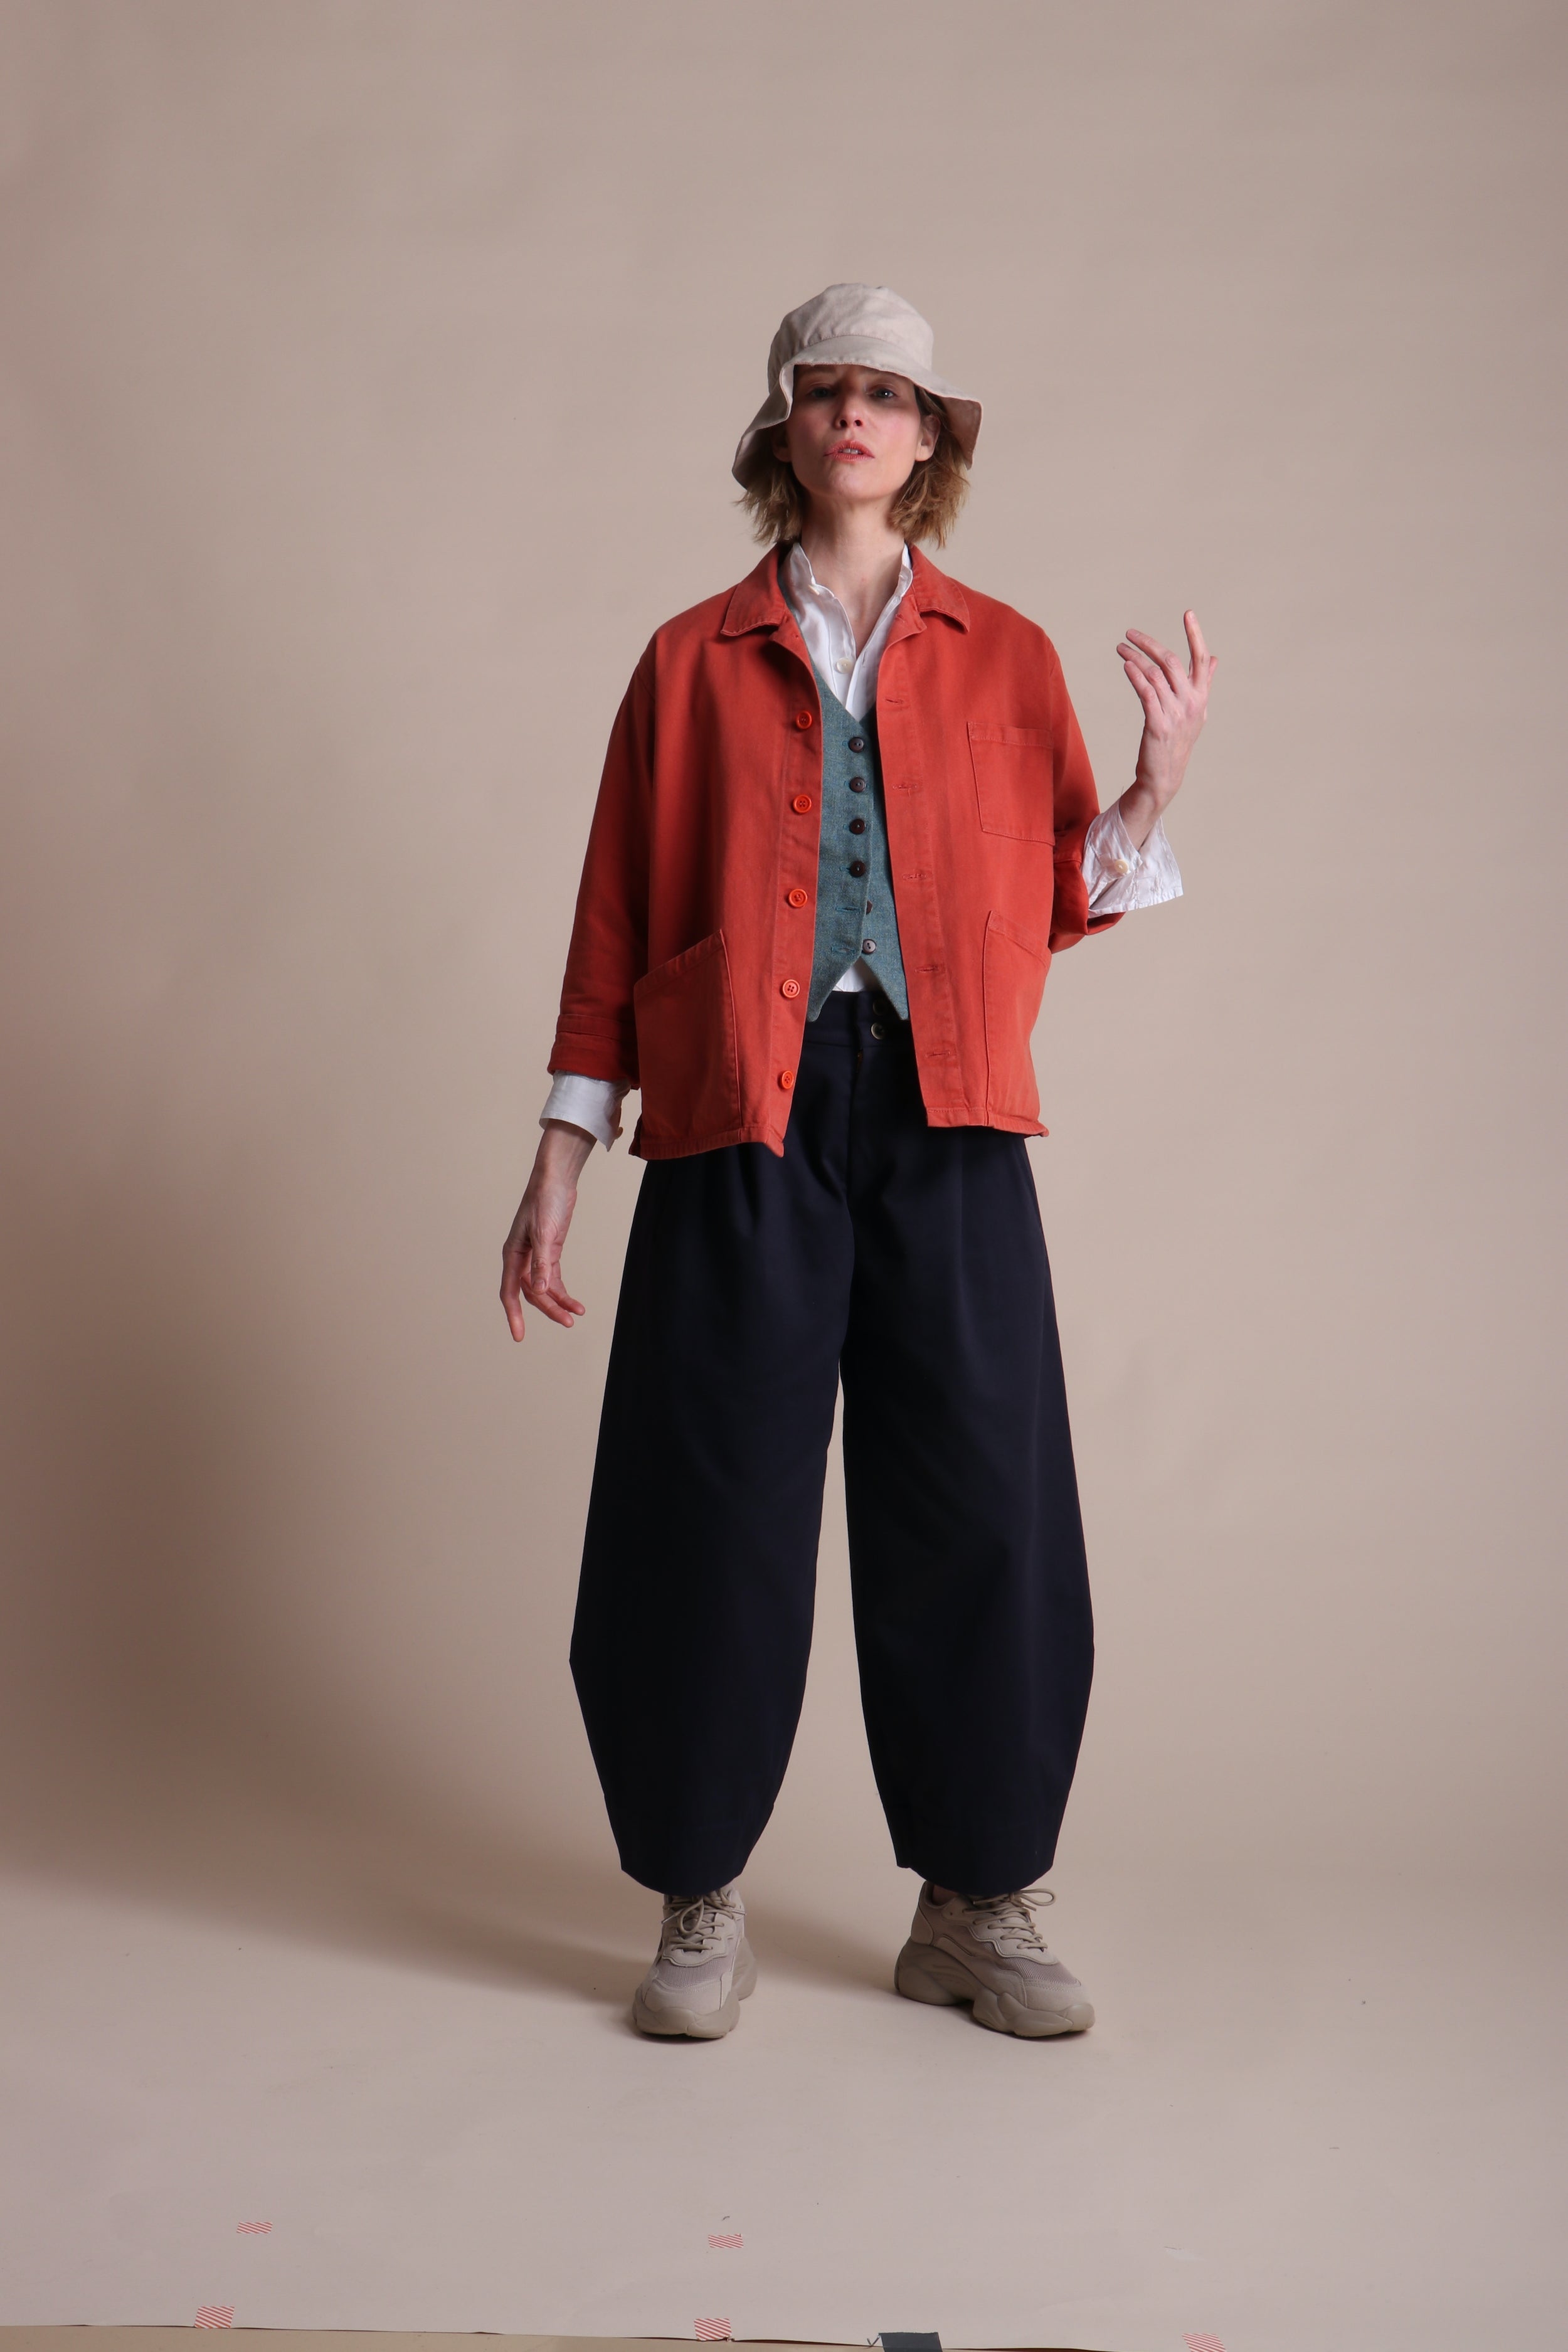 Woman wearing Carrier Company Dutch trouser In Navy Cotton Drill, Work Jacket in Orange and Cotton Sun Hat